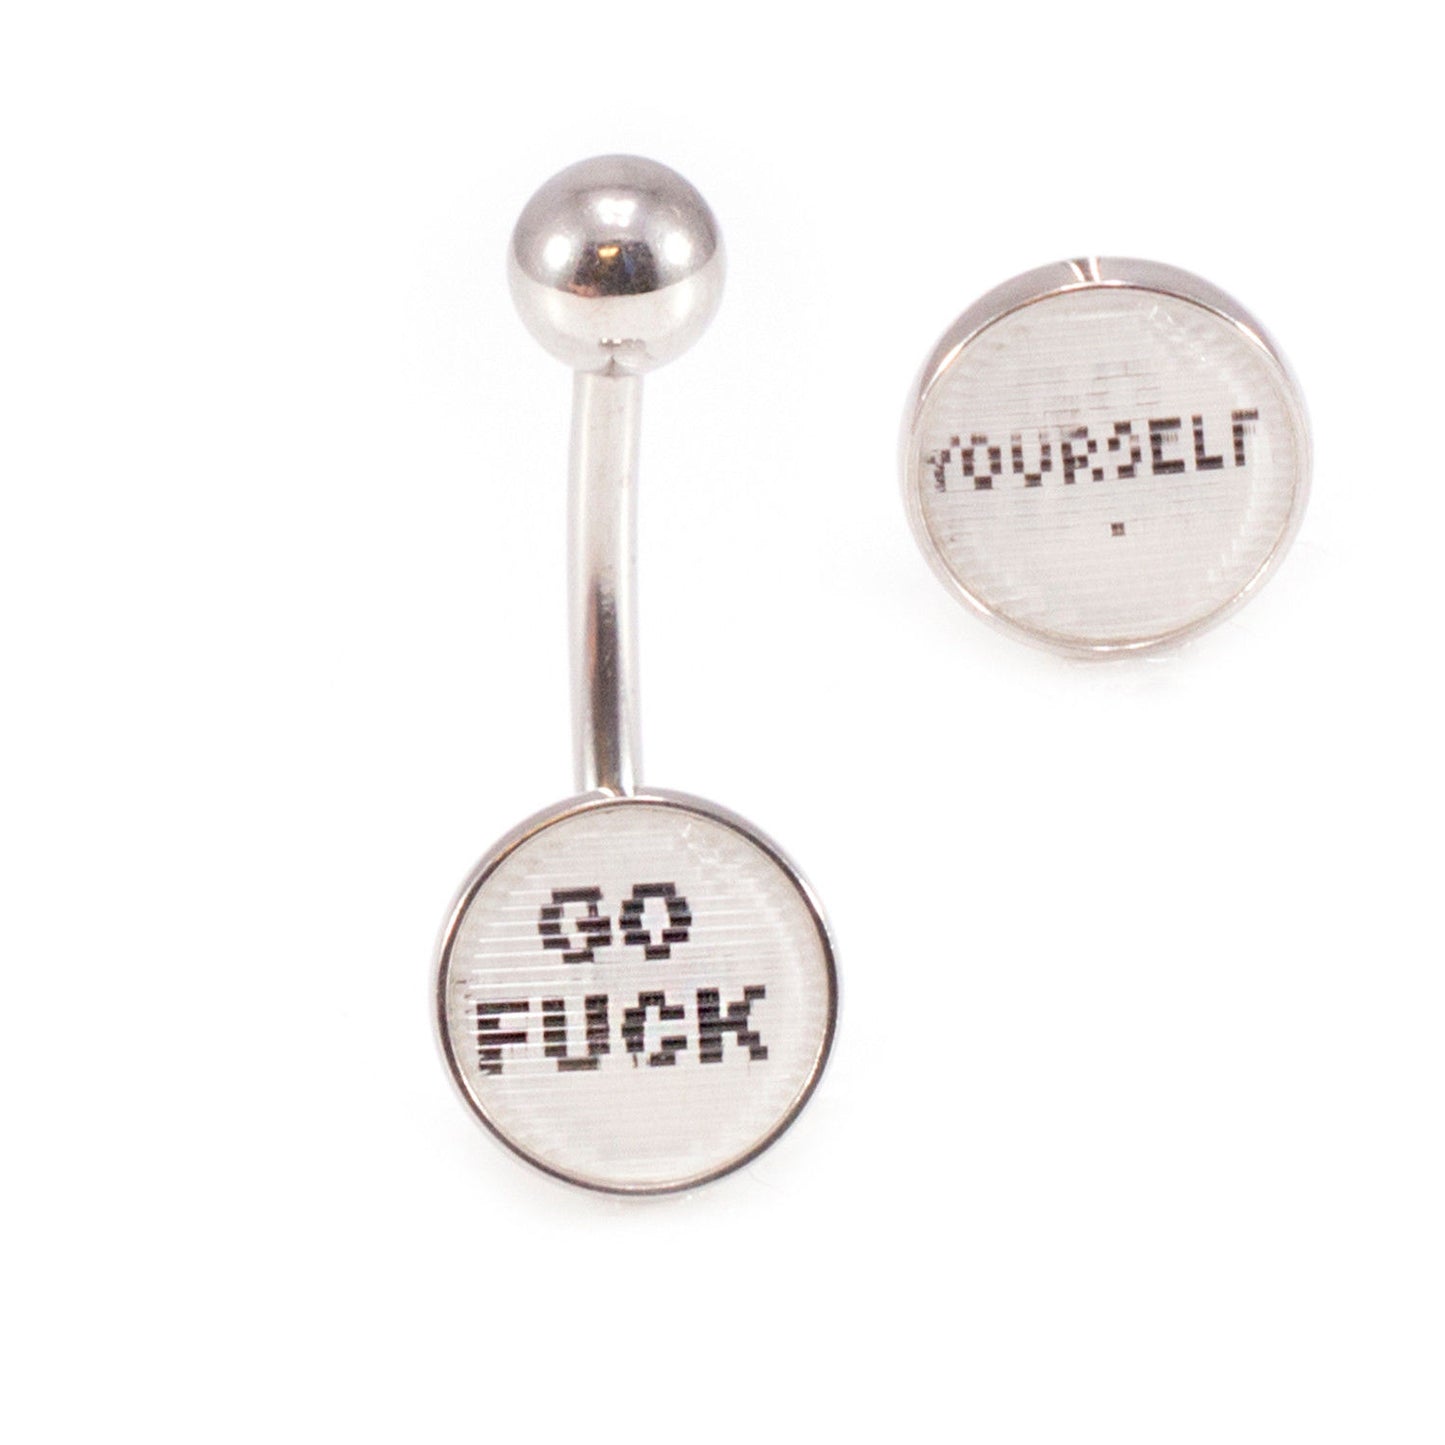 Belly Button Ring with Lenticular Go F**ck Yourself Message 14g Navel Ring